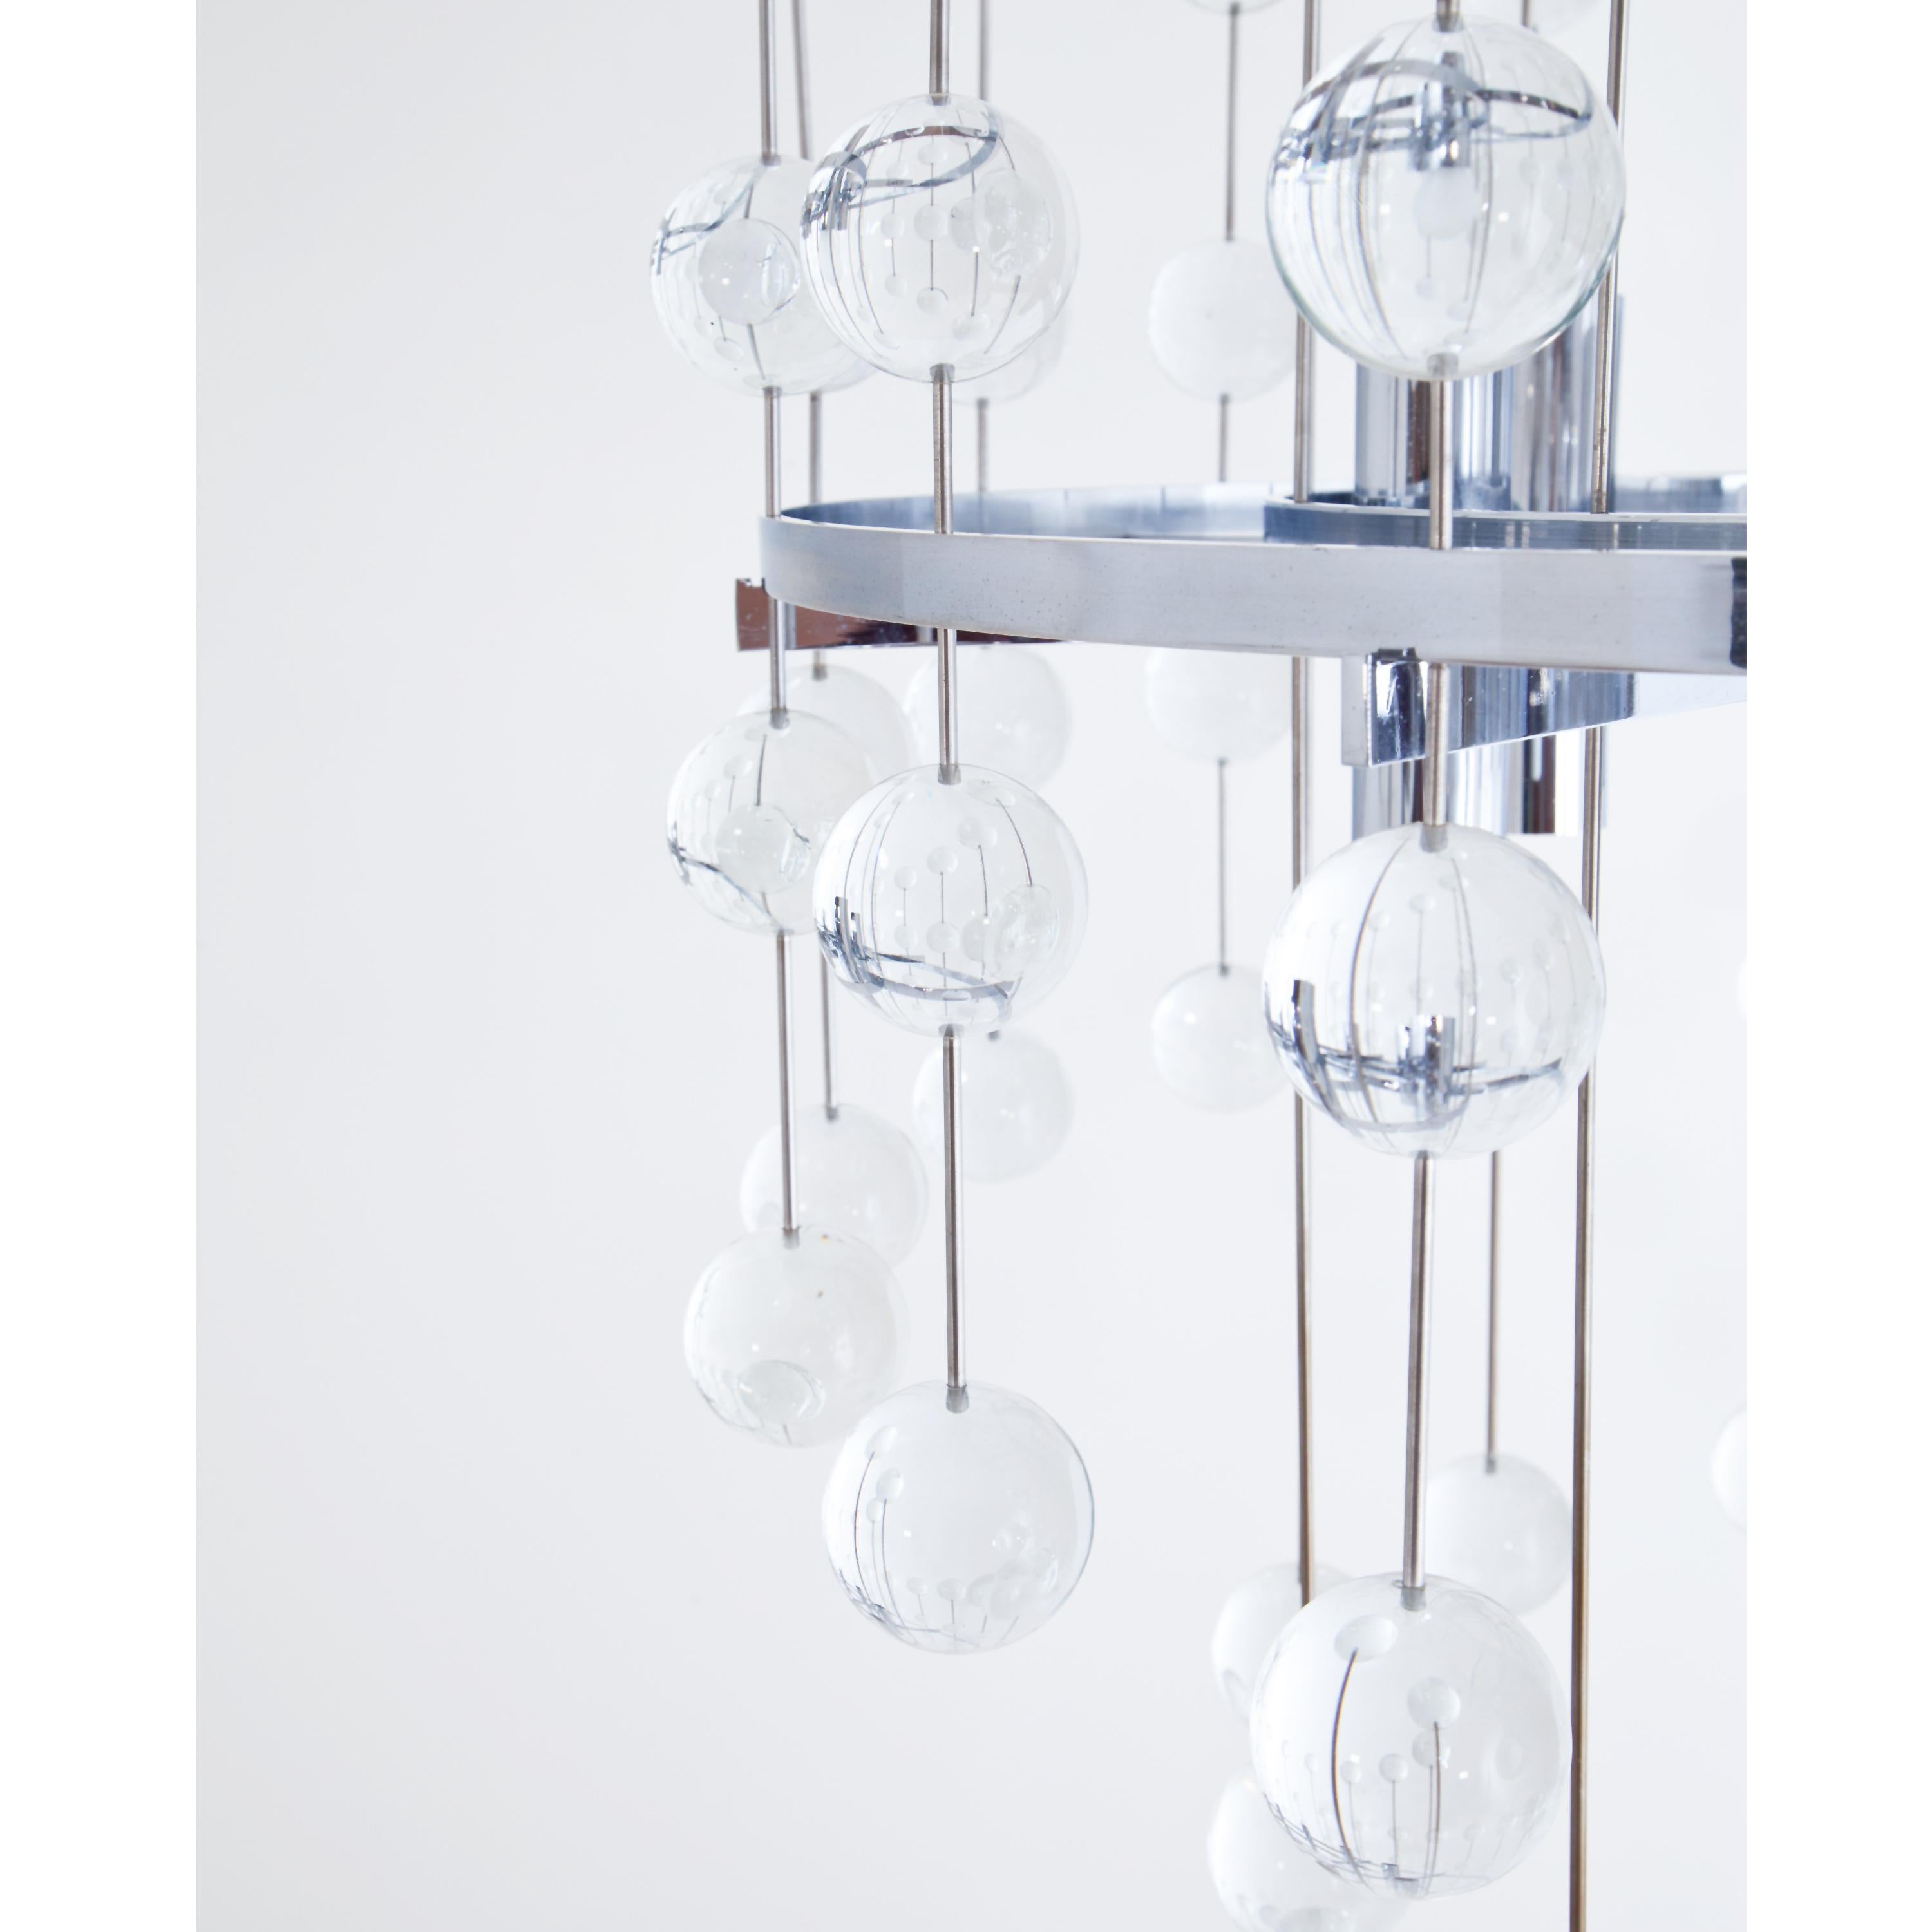 Aloys F. Gangkofner Glass and Chromed Steel Chandelier, Munich, 1970s In Good Condition For Sale In Greding, DE